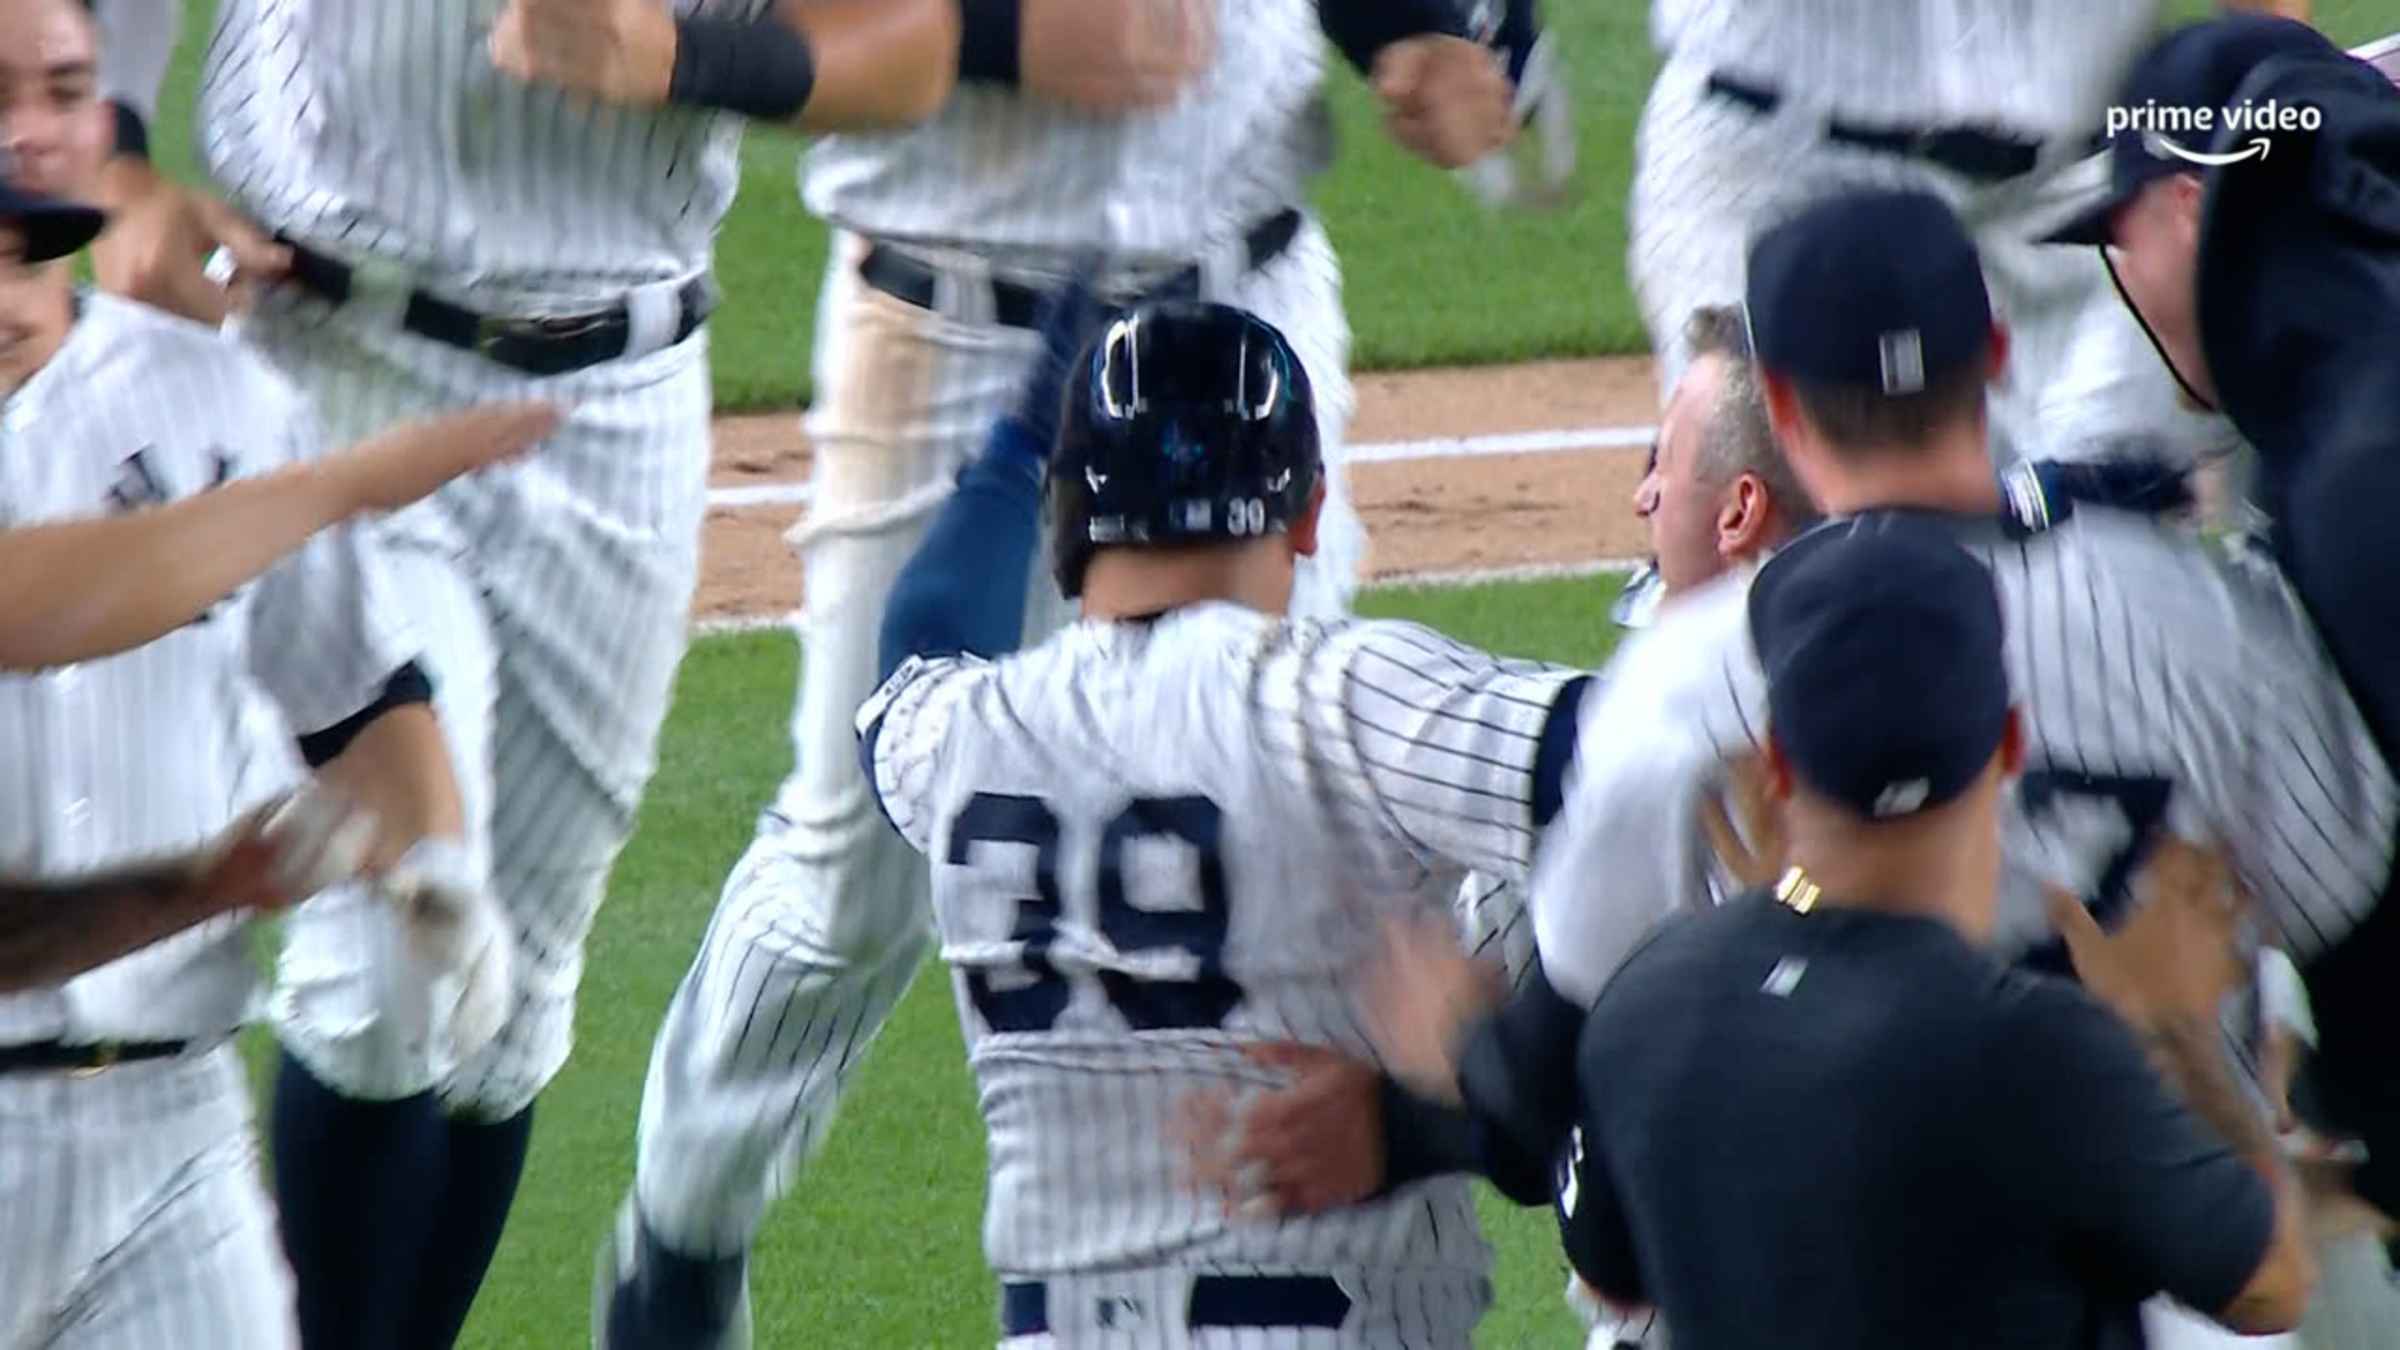 Jose Trevino's pinch-hit single in 13th gives Yankees victory over